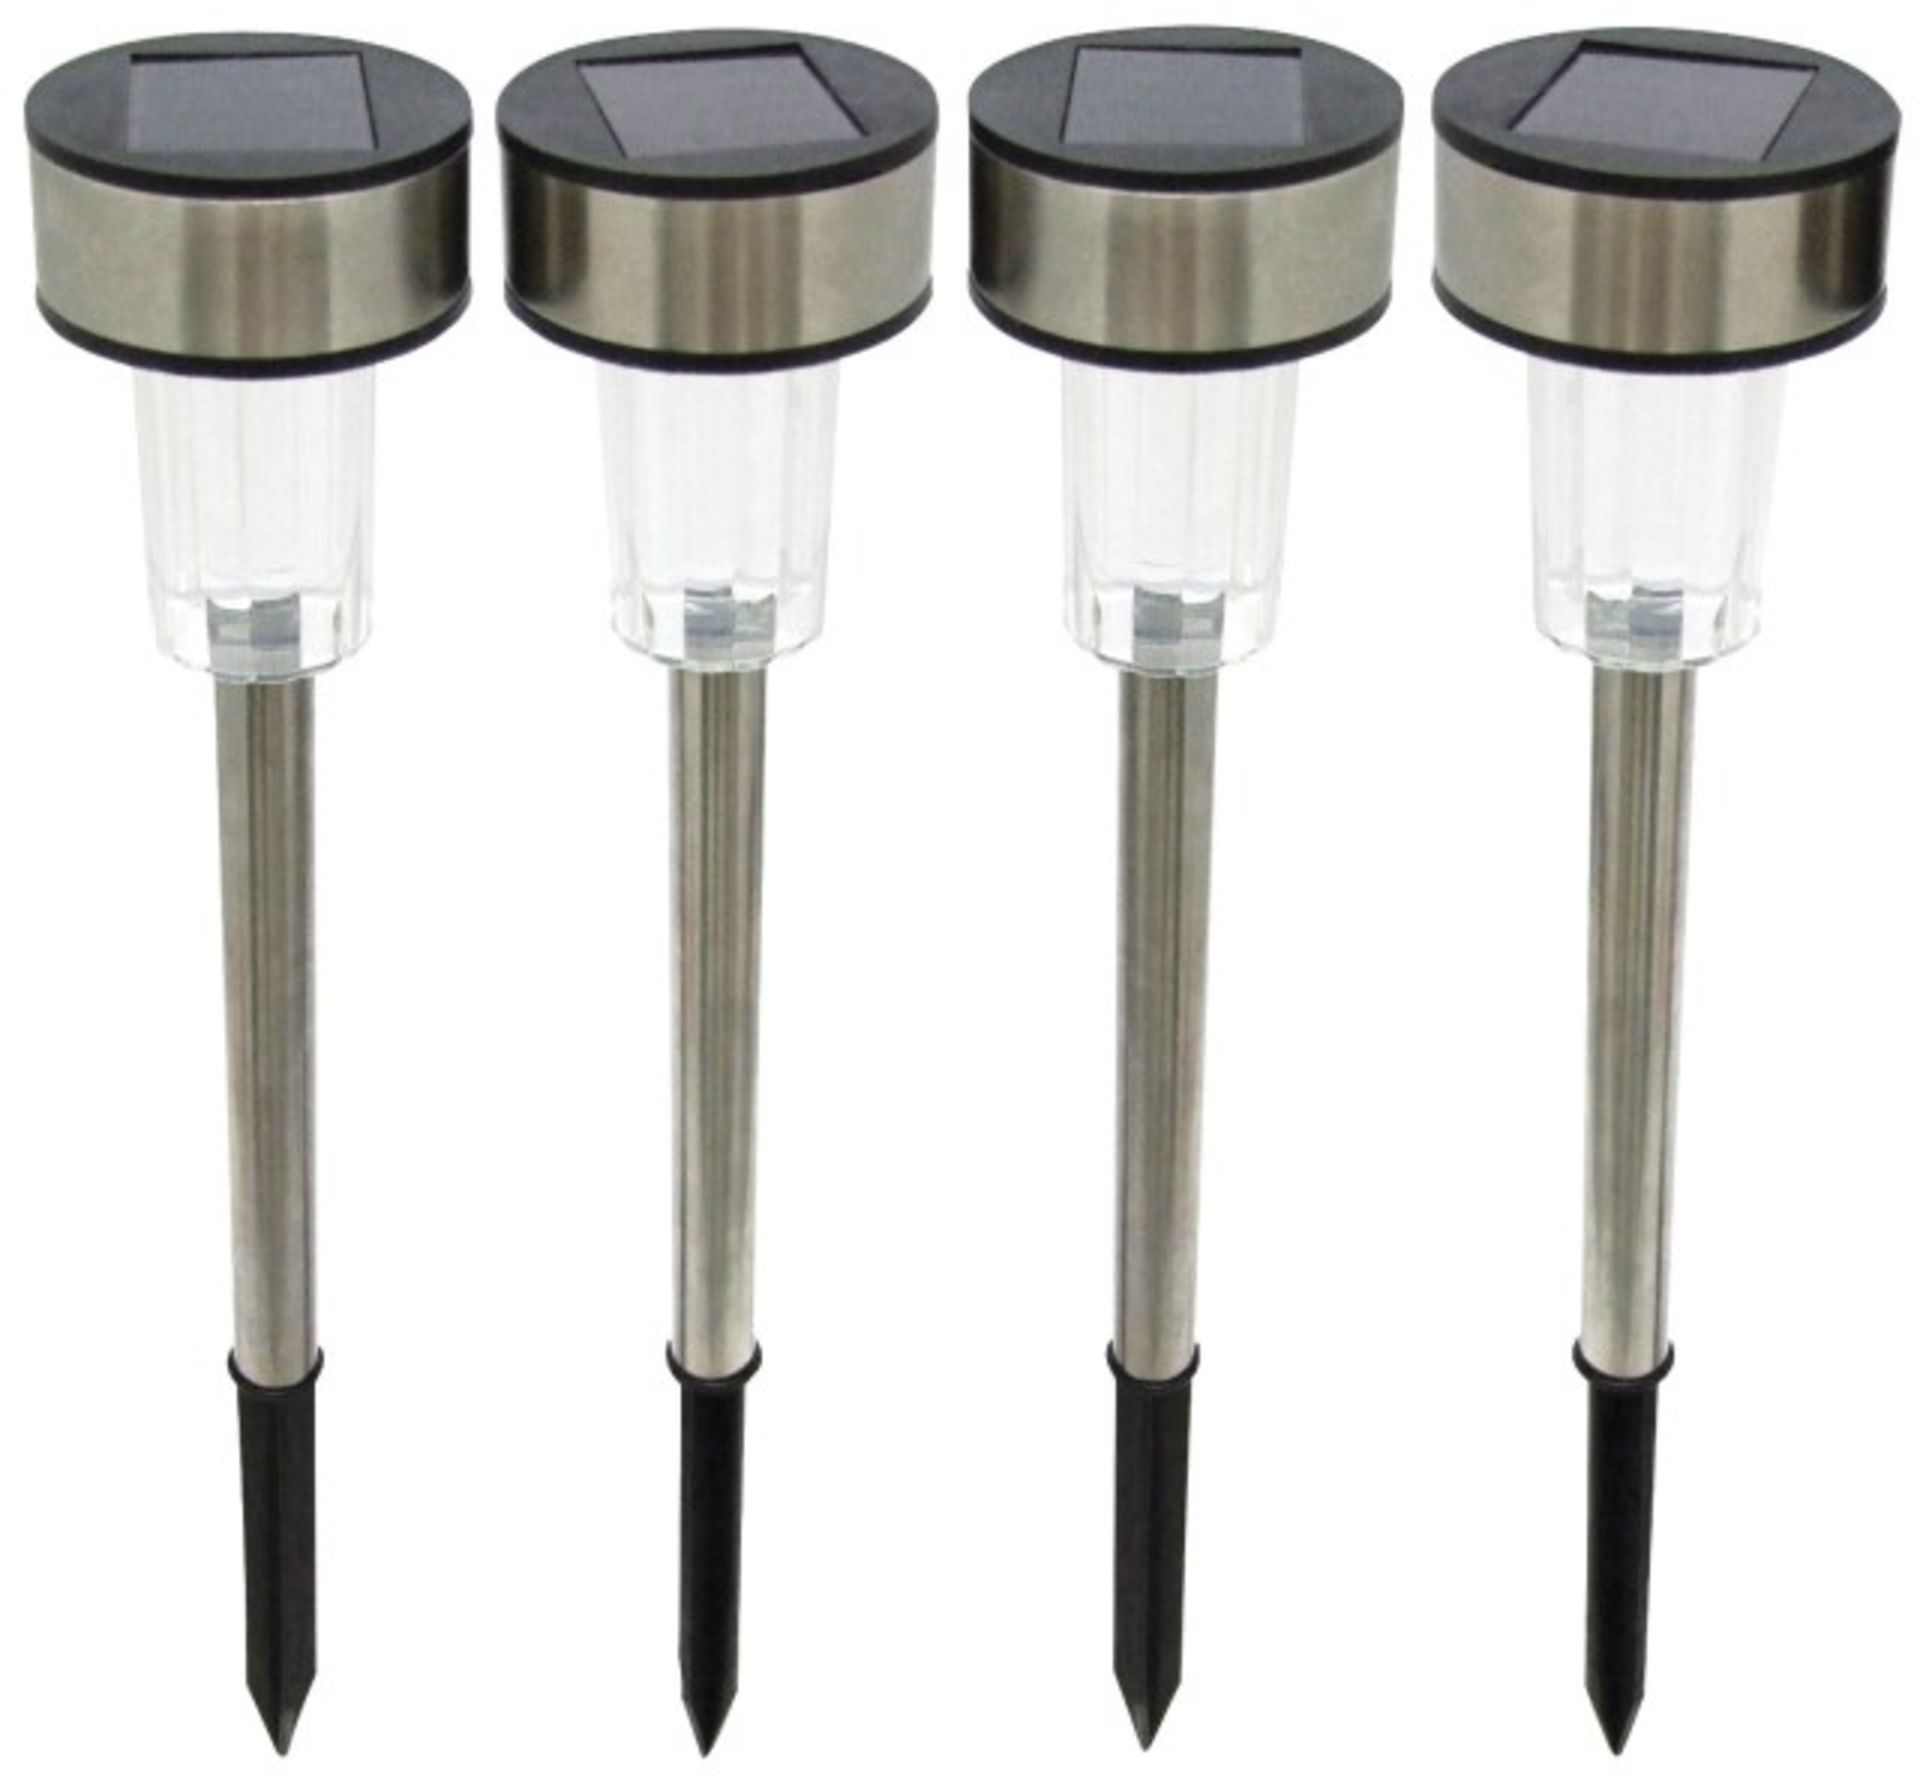 V Brand New Set Of 4 Kempton Stainless Steel Solar Lights X100 Bid price to be multiplied by One